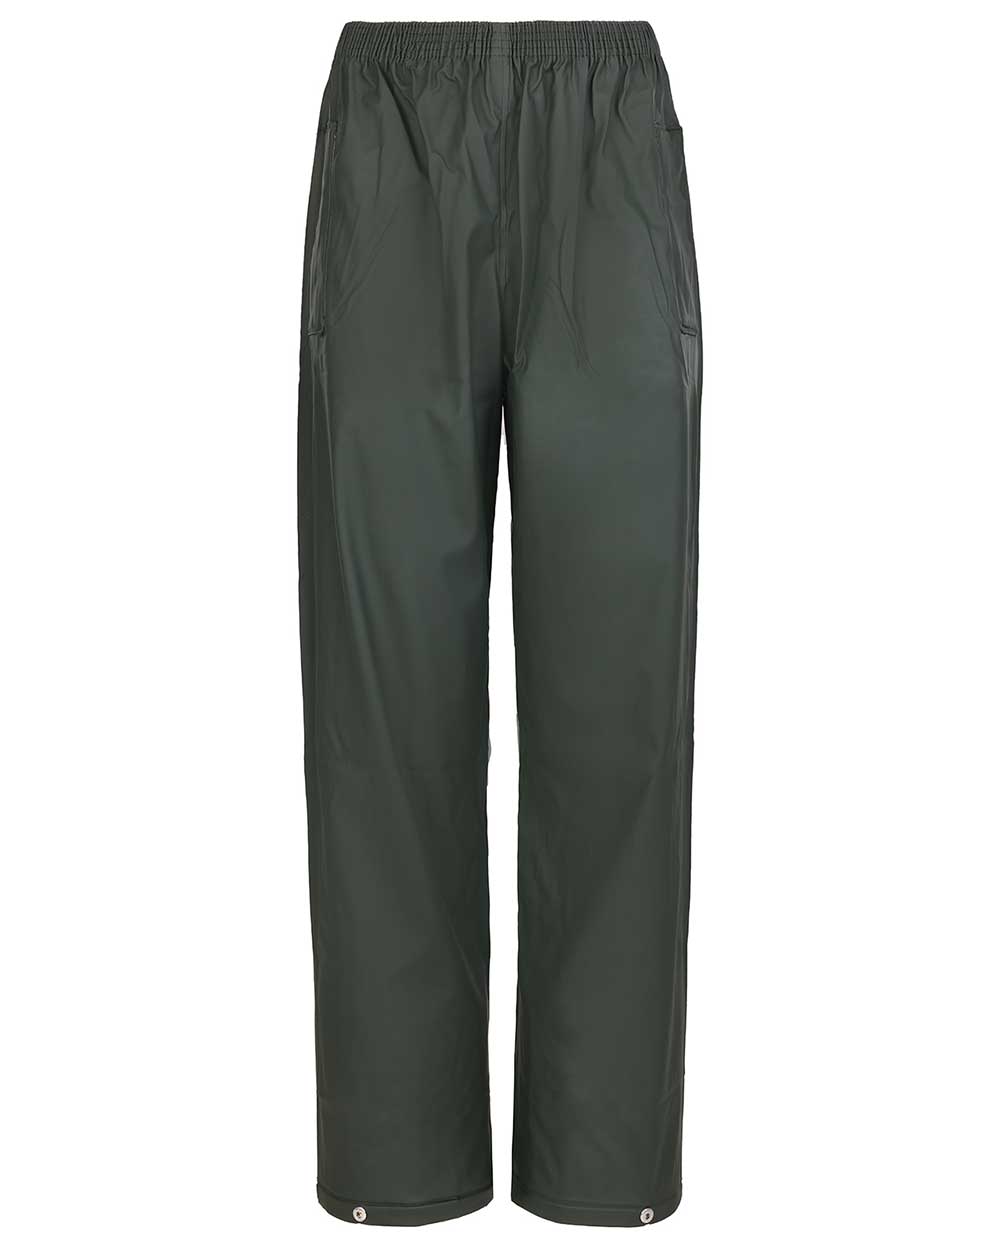 Front view Fort Fortex Flex Waterproof Trousers in Green 